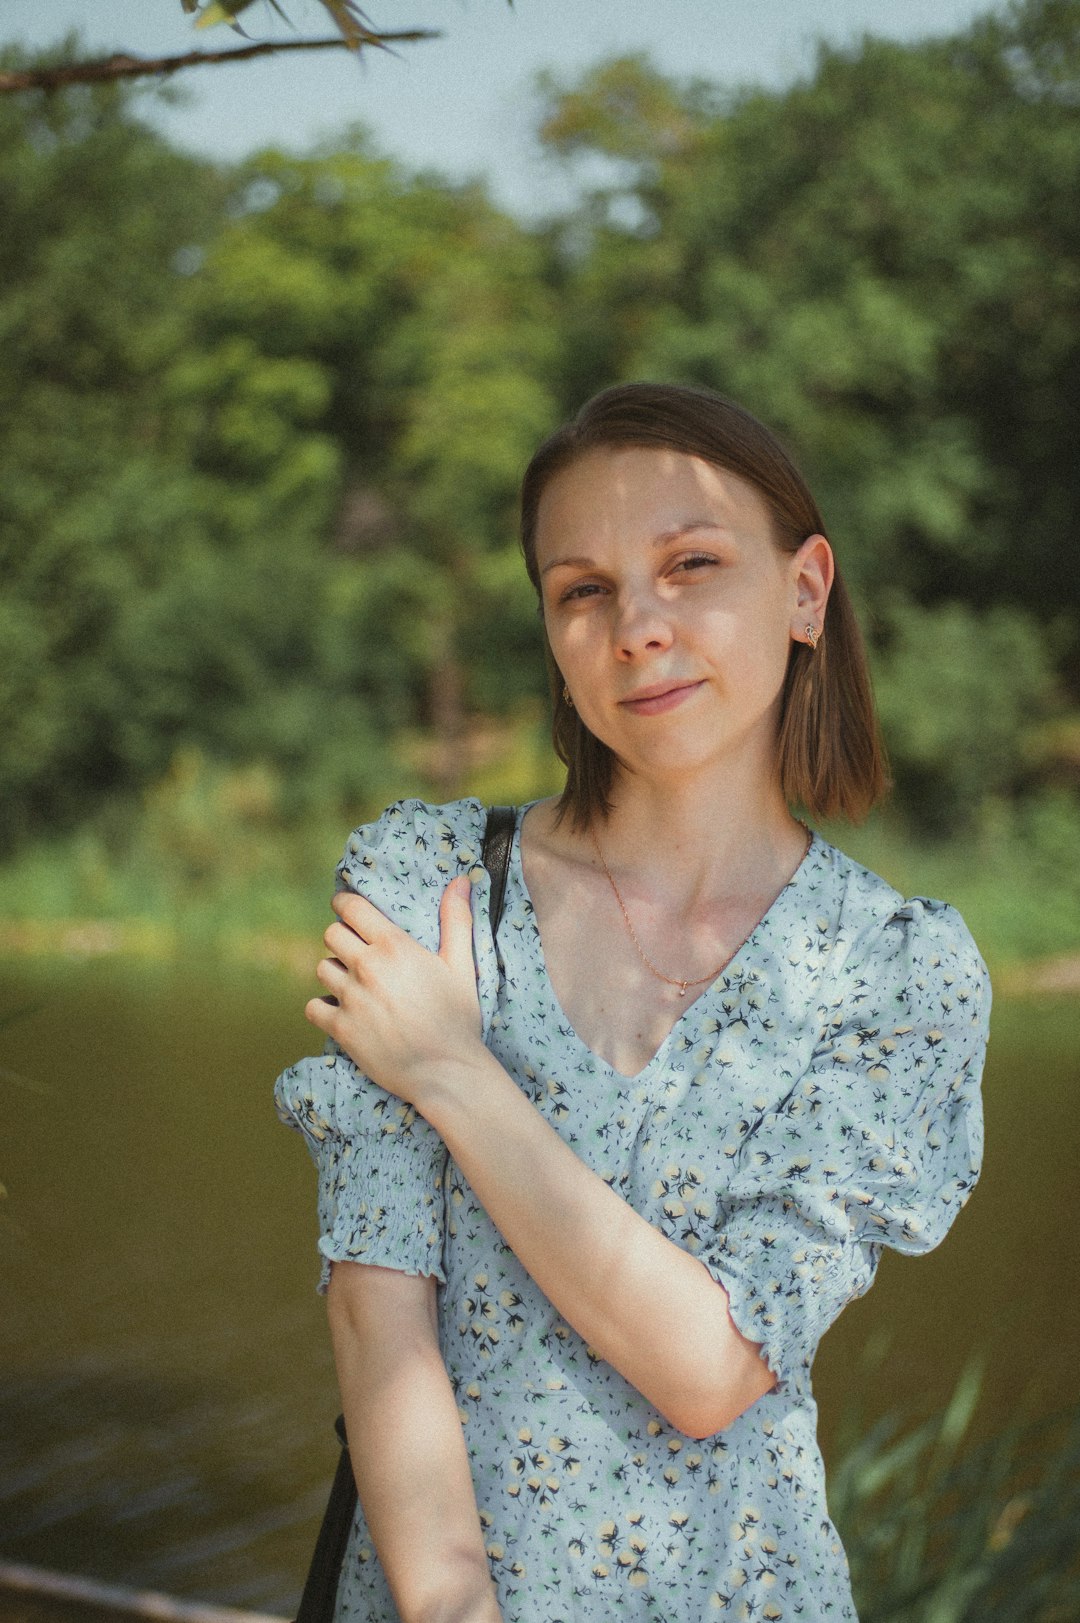 woman in white and blue floral shirt standing near lake during daytime